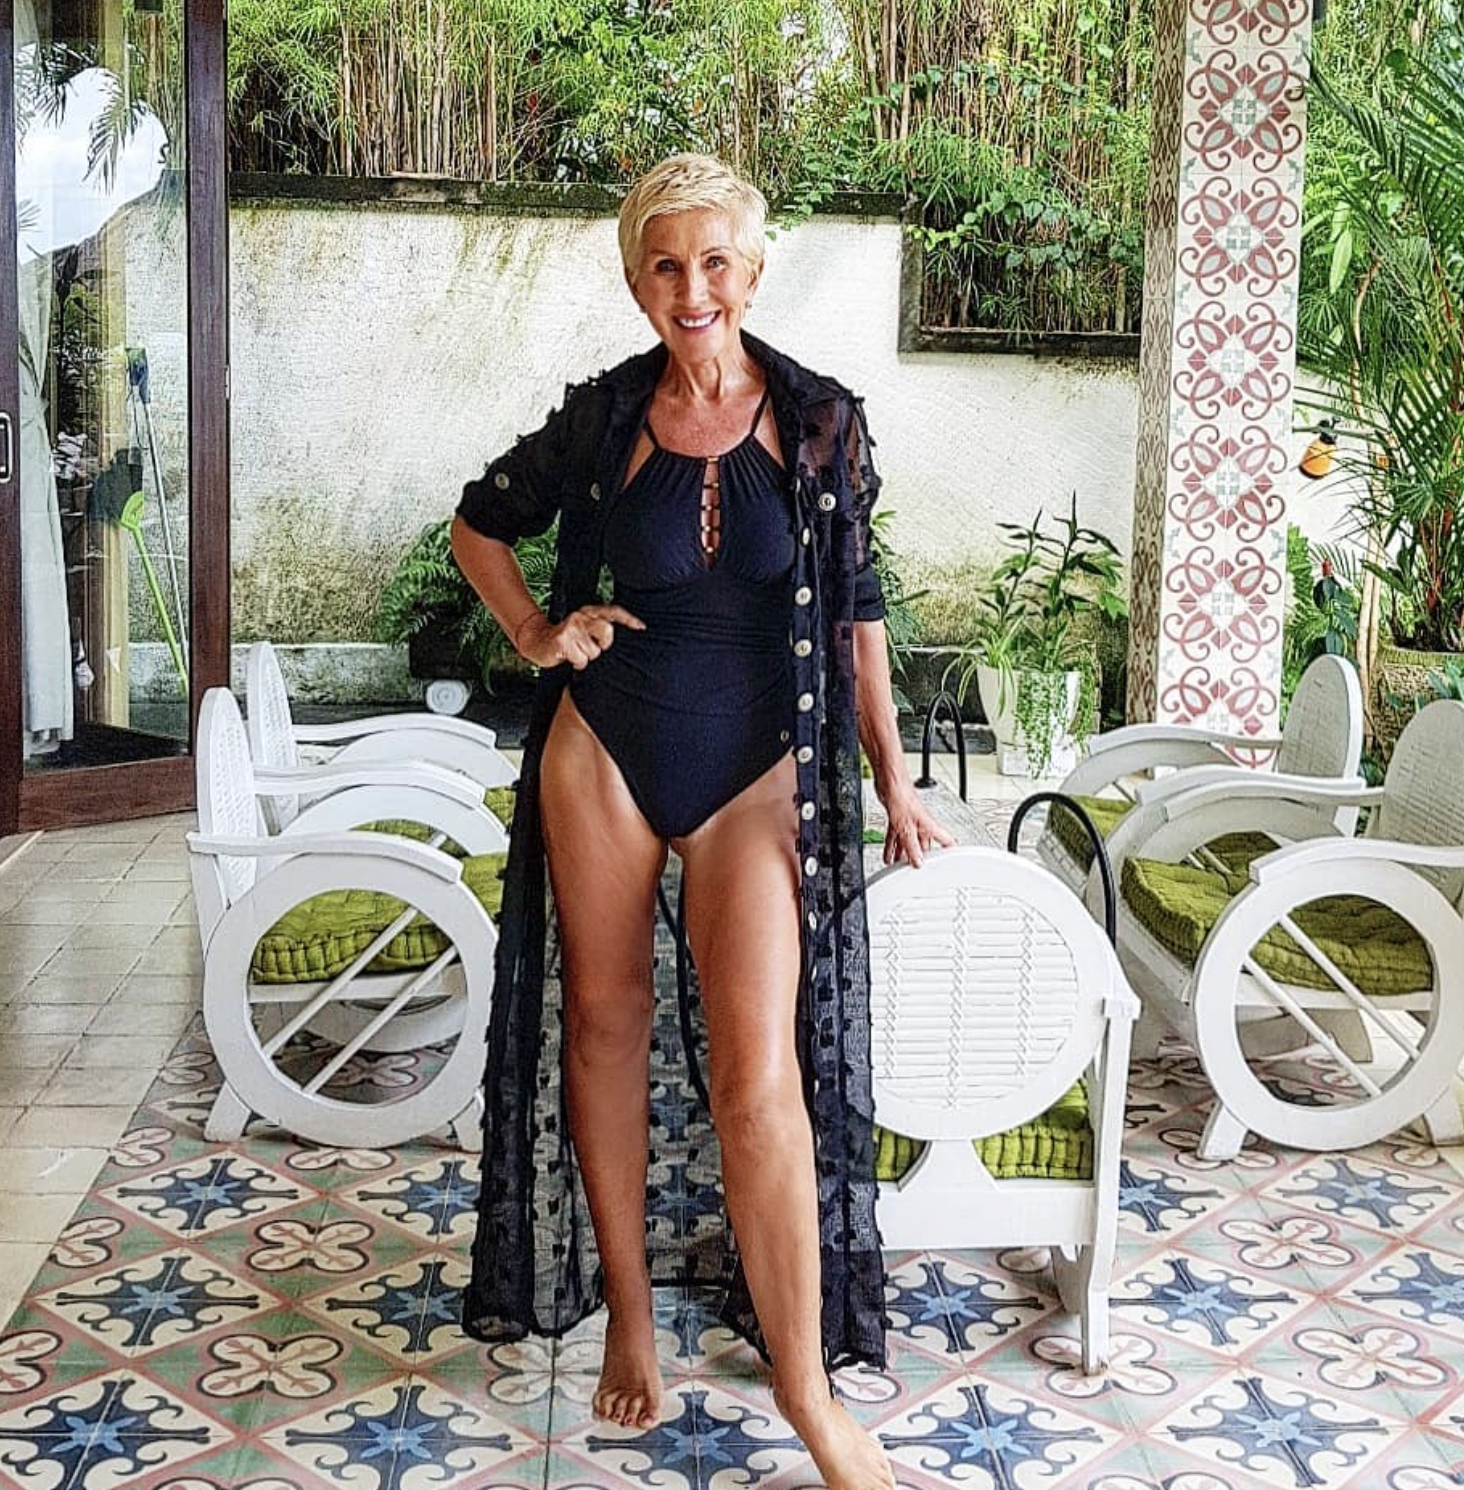 63-year-old model travels the world